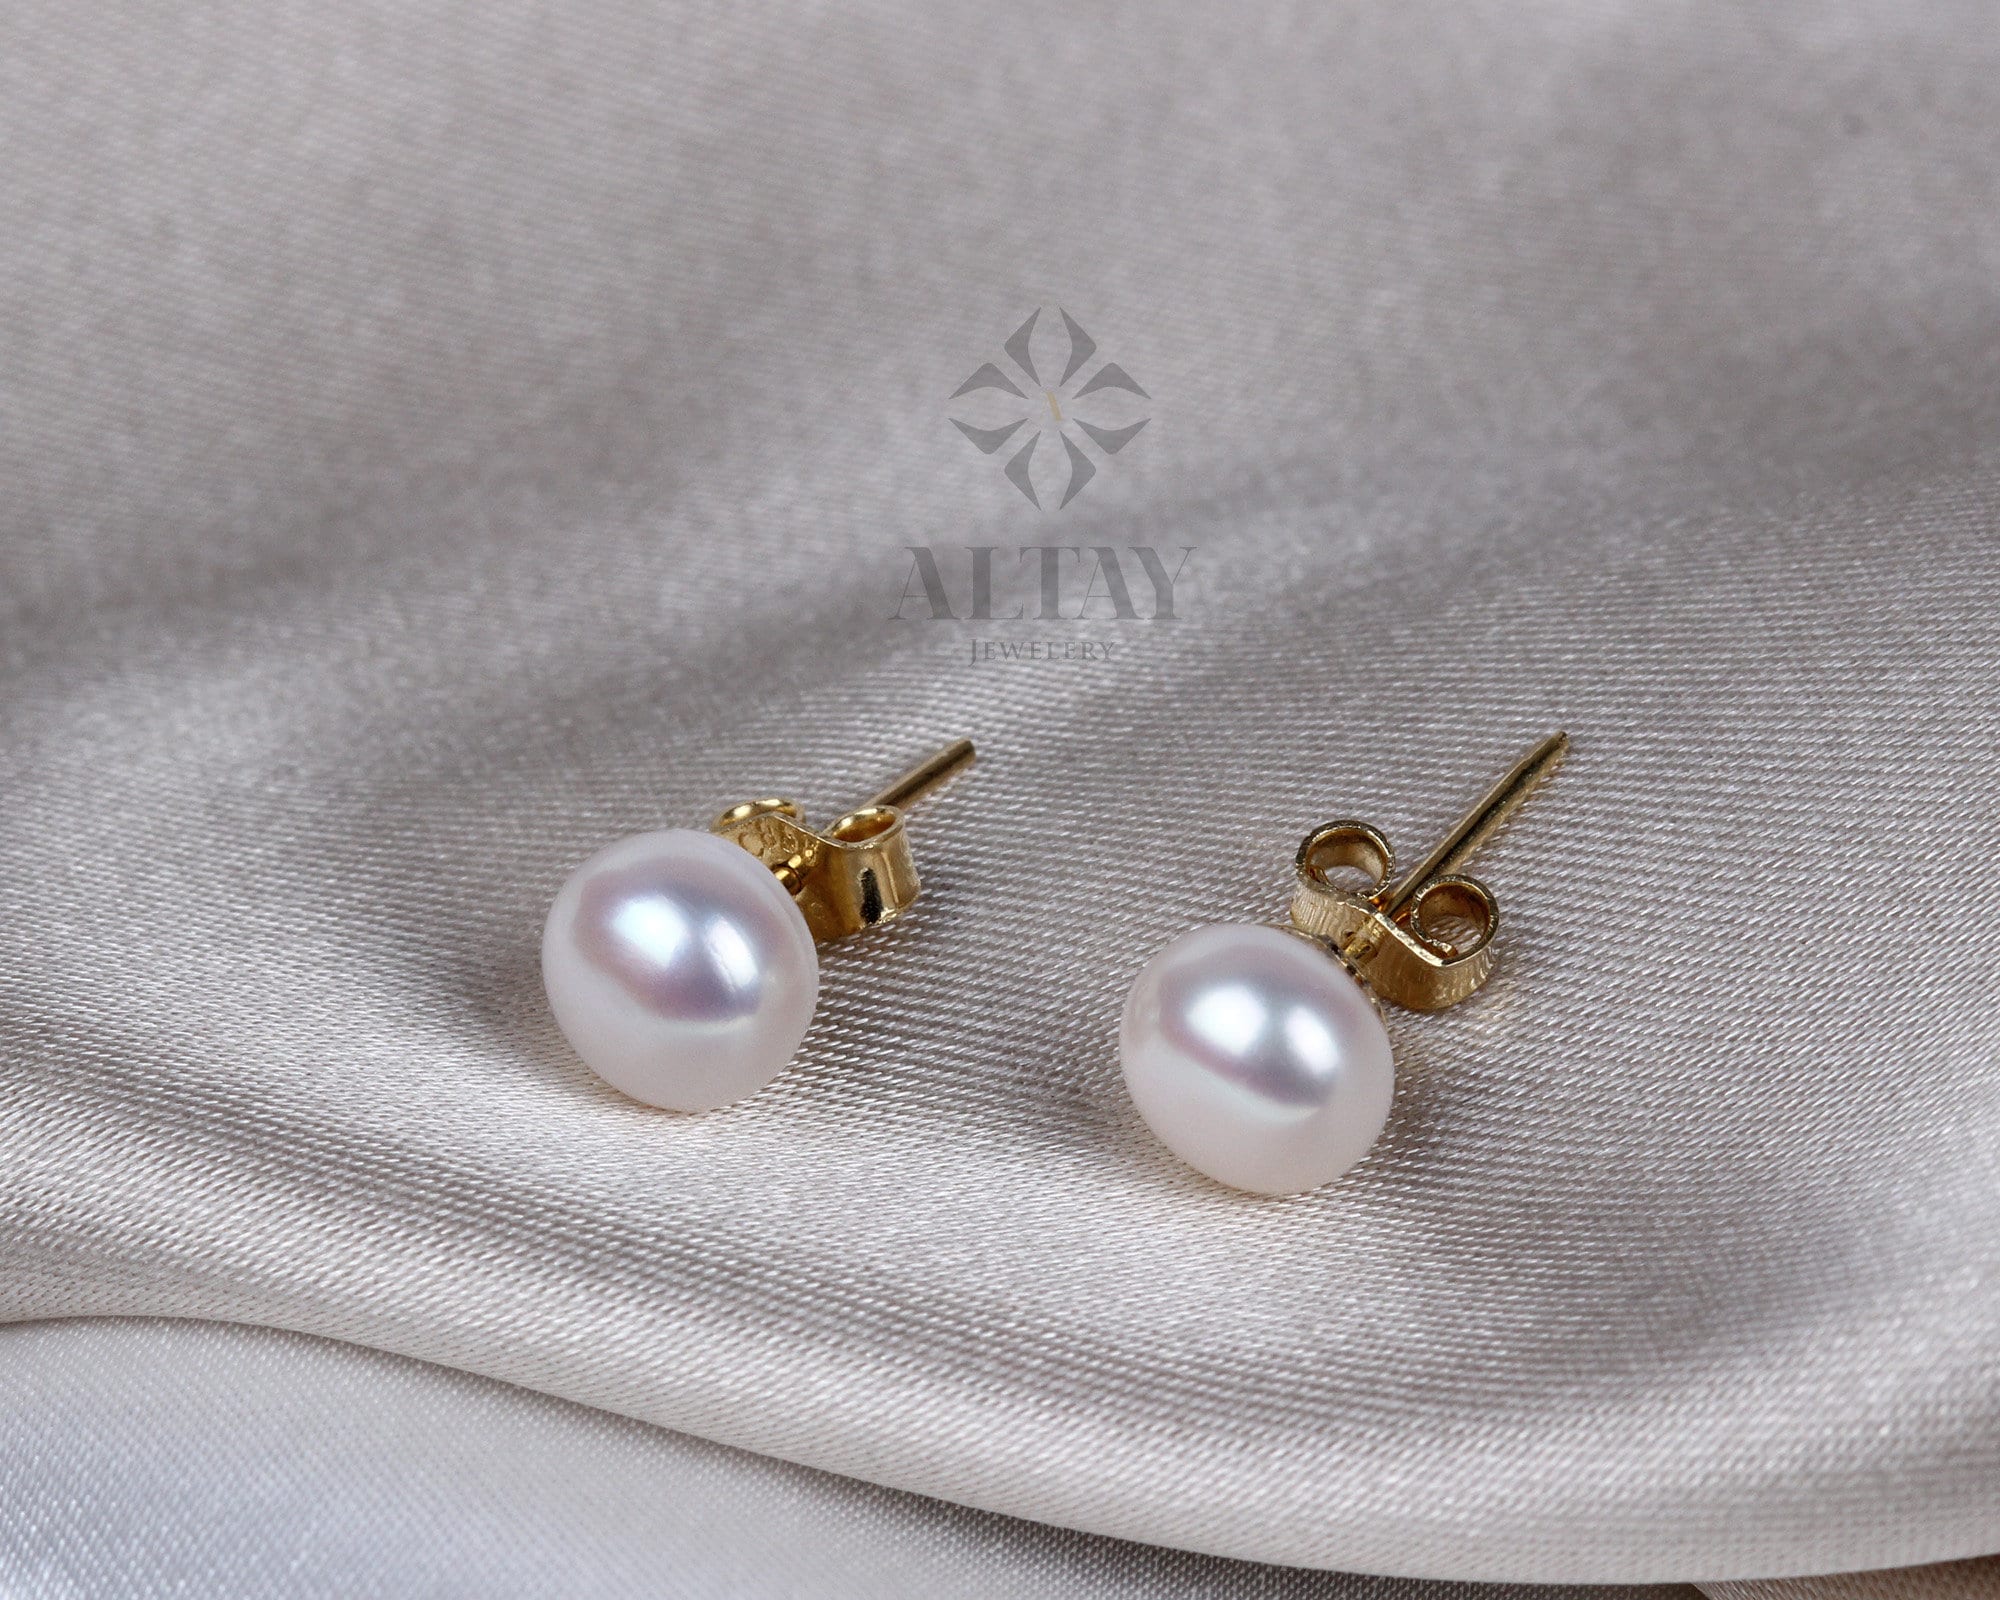 14K Gold Pearl Balls Earring, Shiny Finish, Tiny Lightweight, Gift For Her, Minimal Fine Jewelery, Fashion Delicate, Cute Dailywear Earring